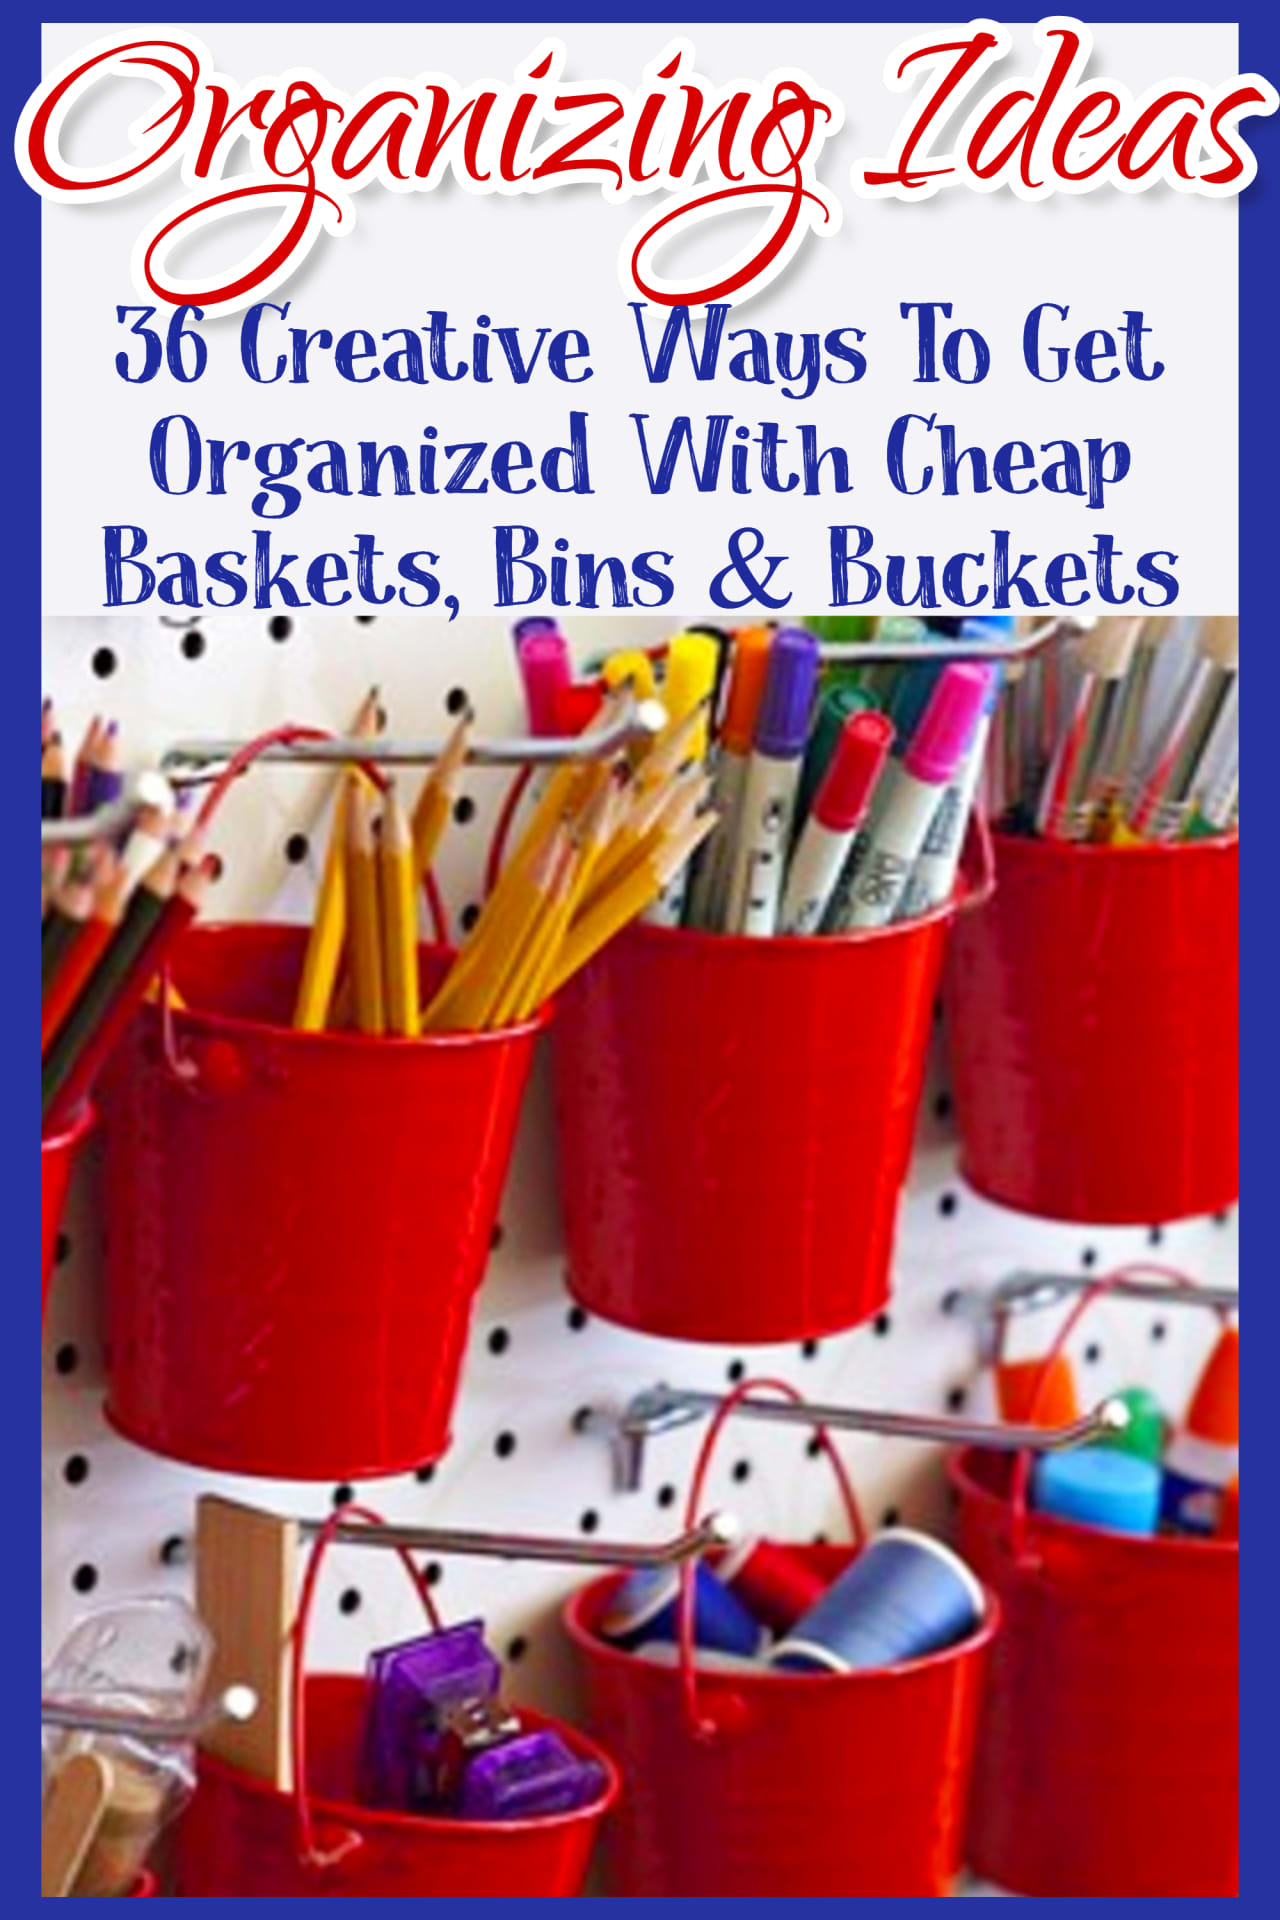 Organizing with baskets, bins and buckets from dollar stores - clutter organization hacks using basket organization ideas